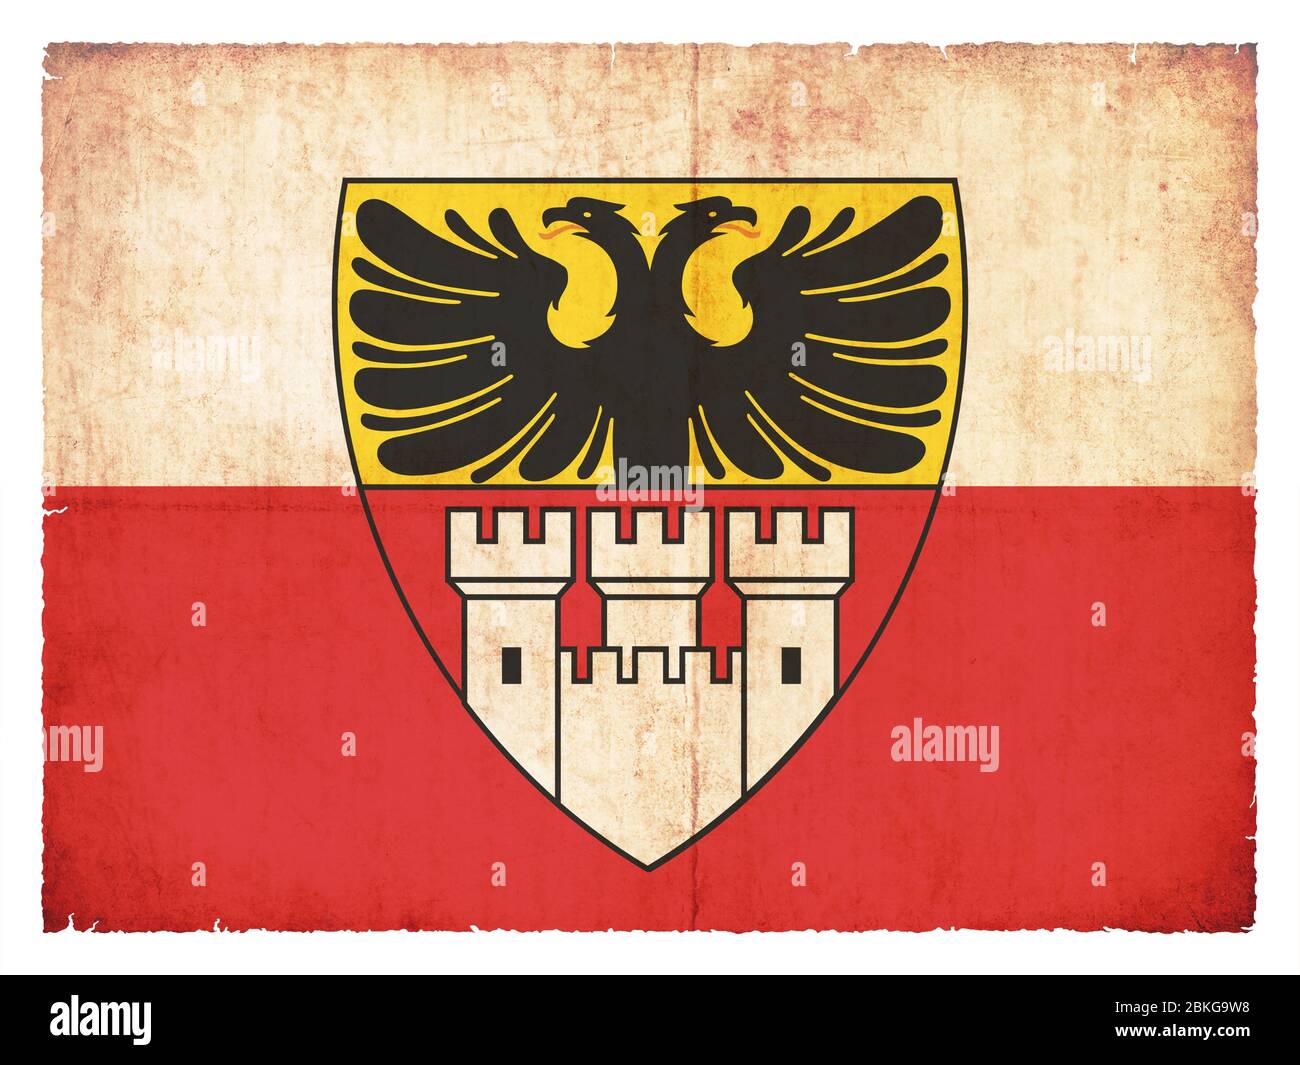 Flag of the German town Duisburg (North Rhine-Westphalia, Germany) created in grunge style Stock Photo